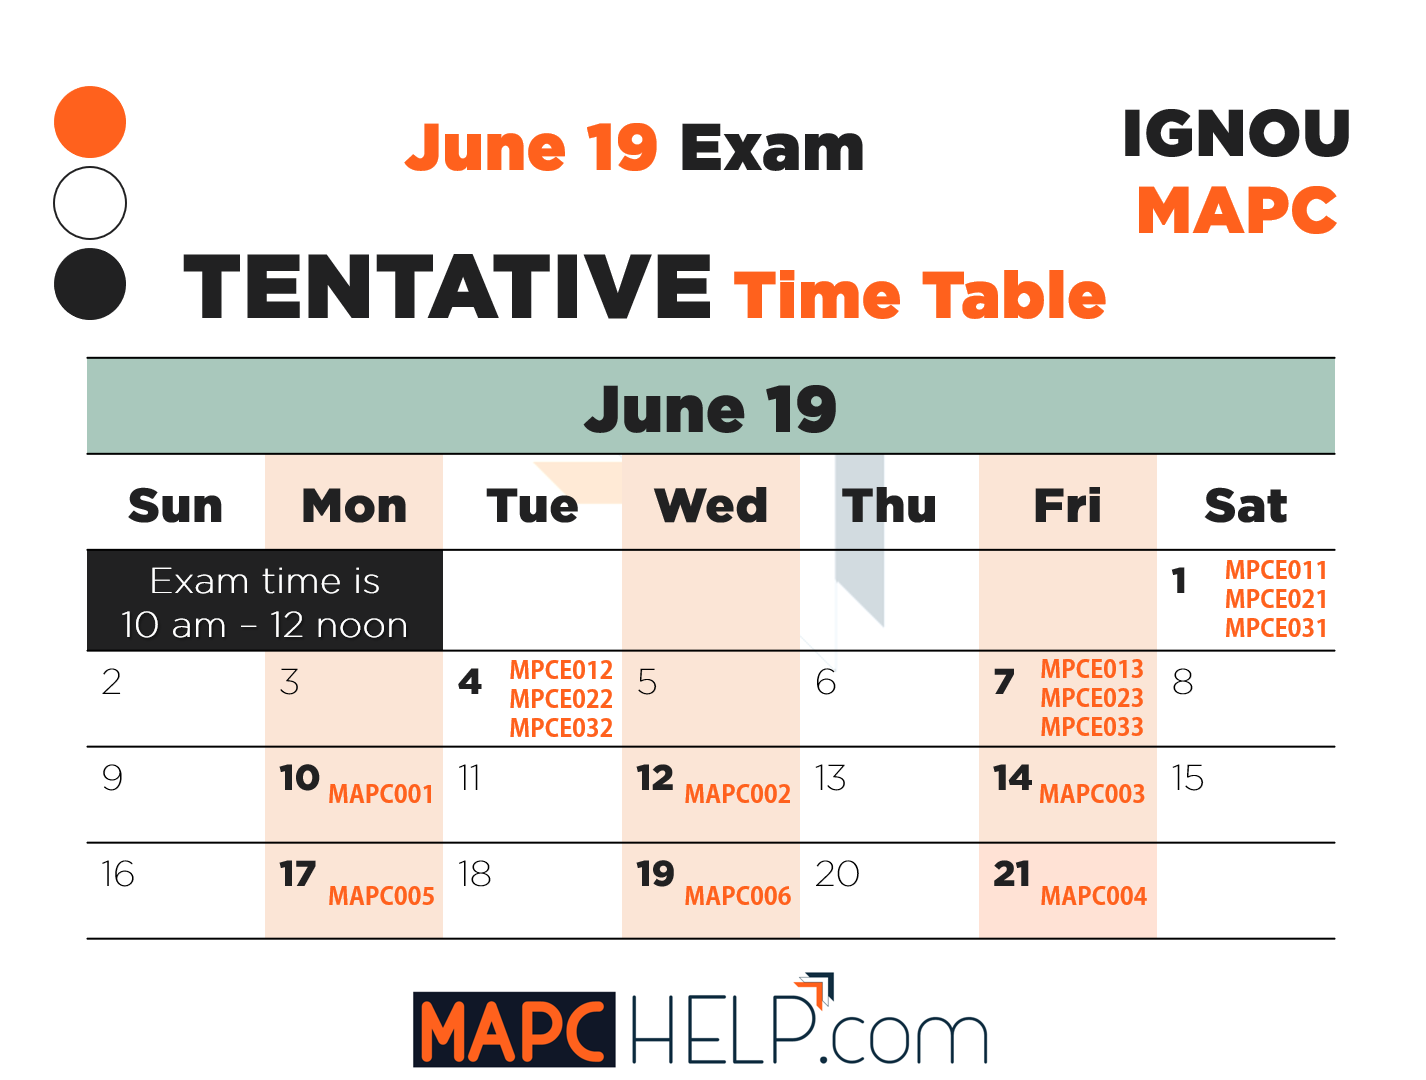 Tentative Time Table for June 19 EXAM